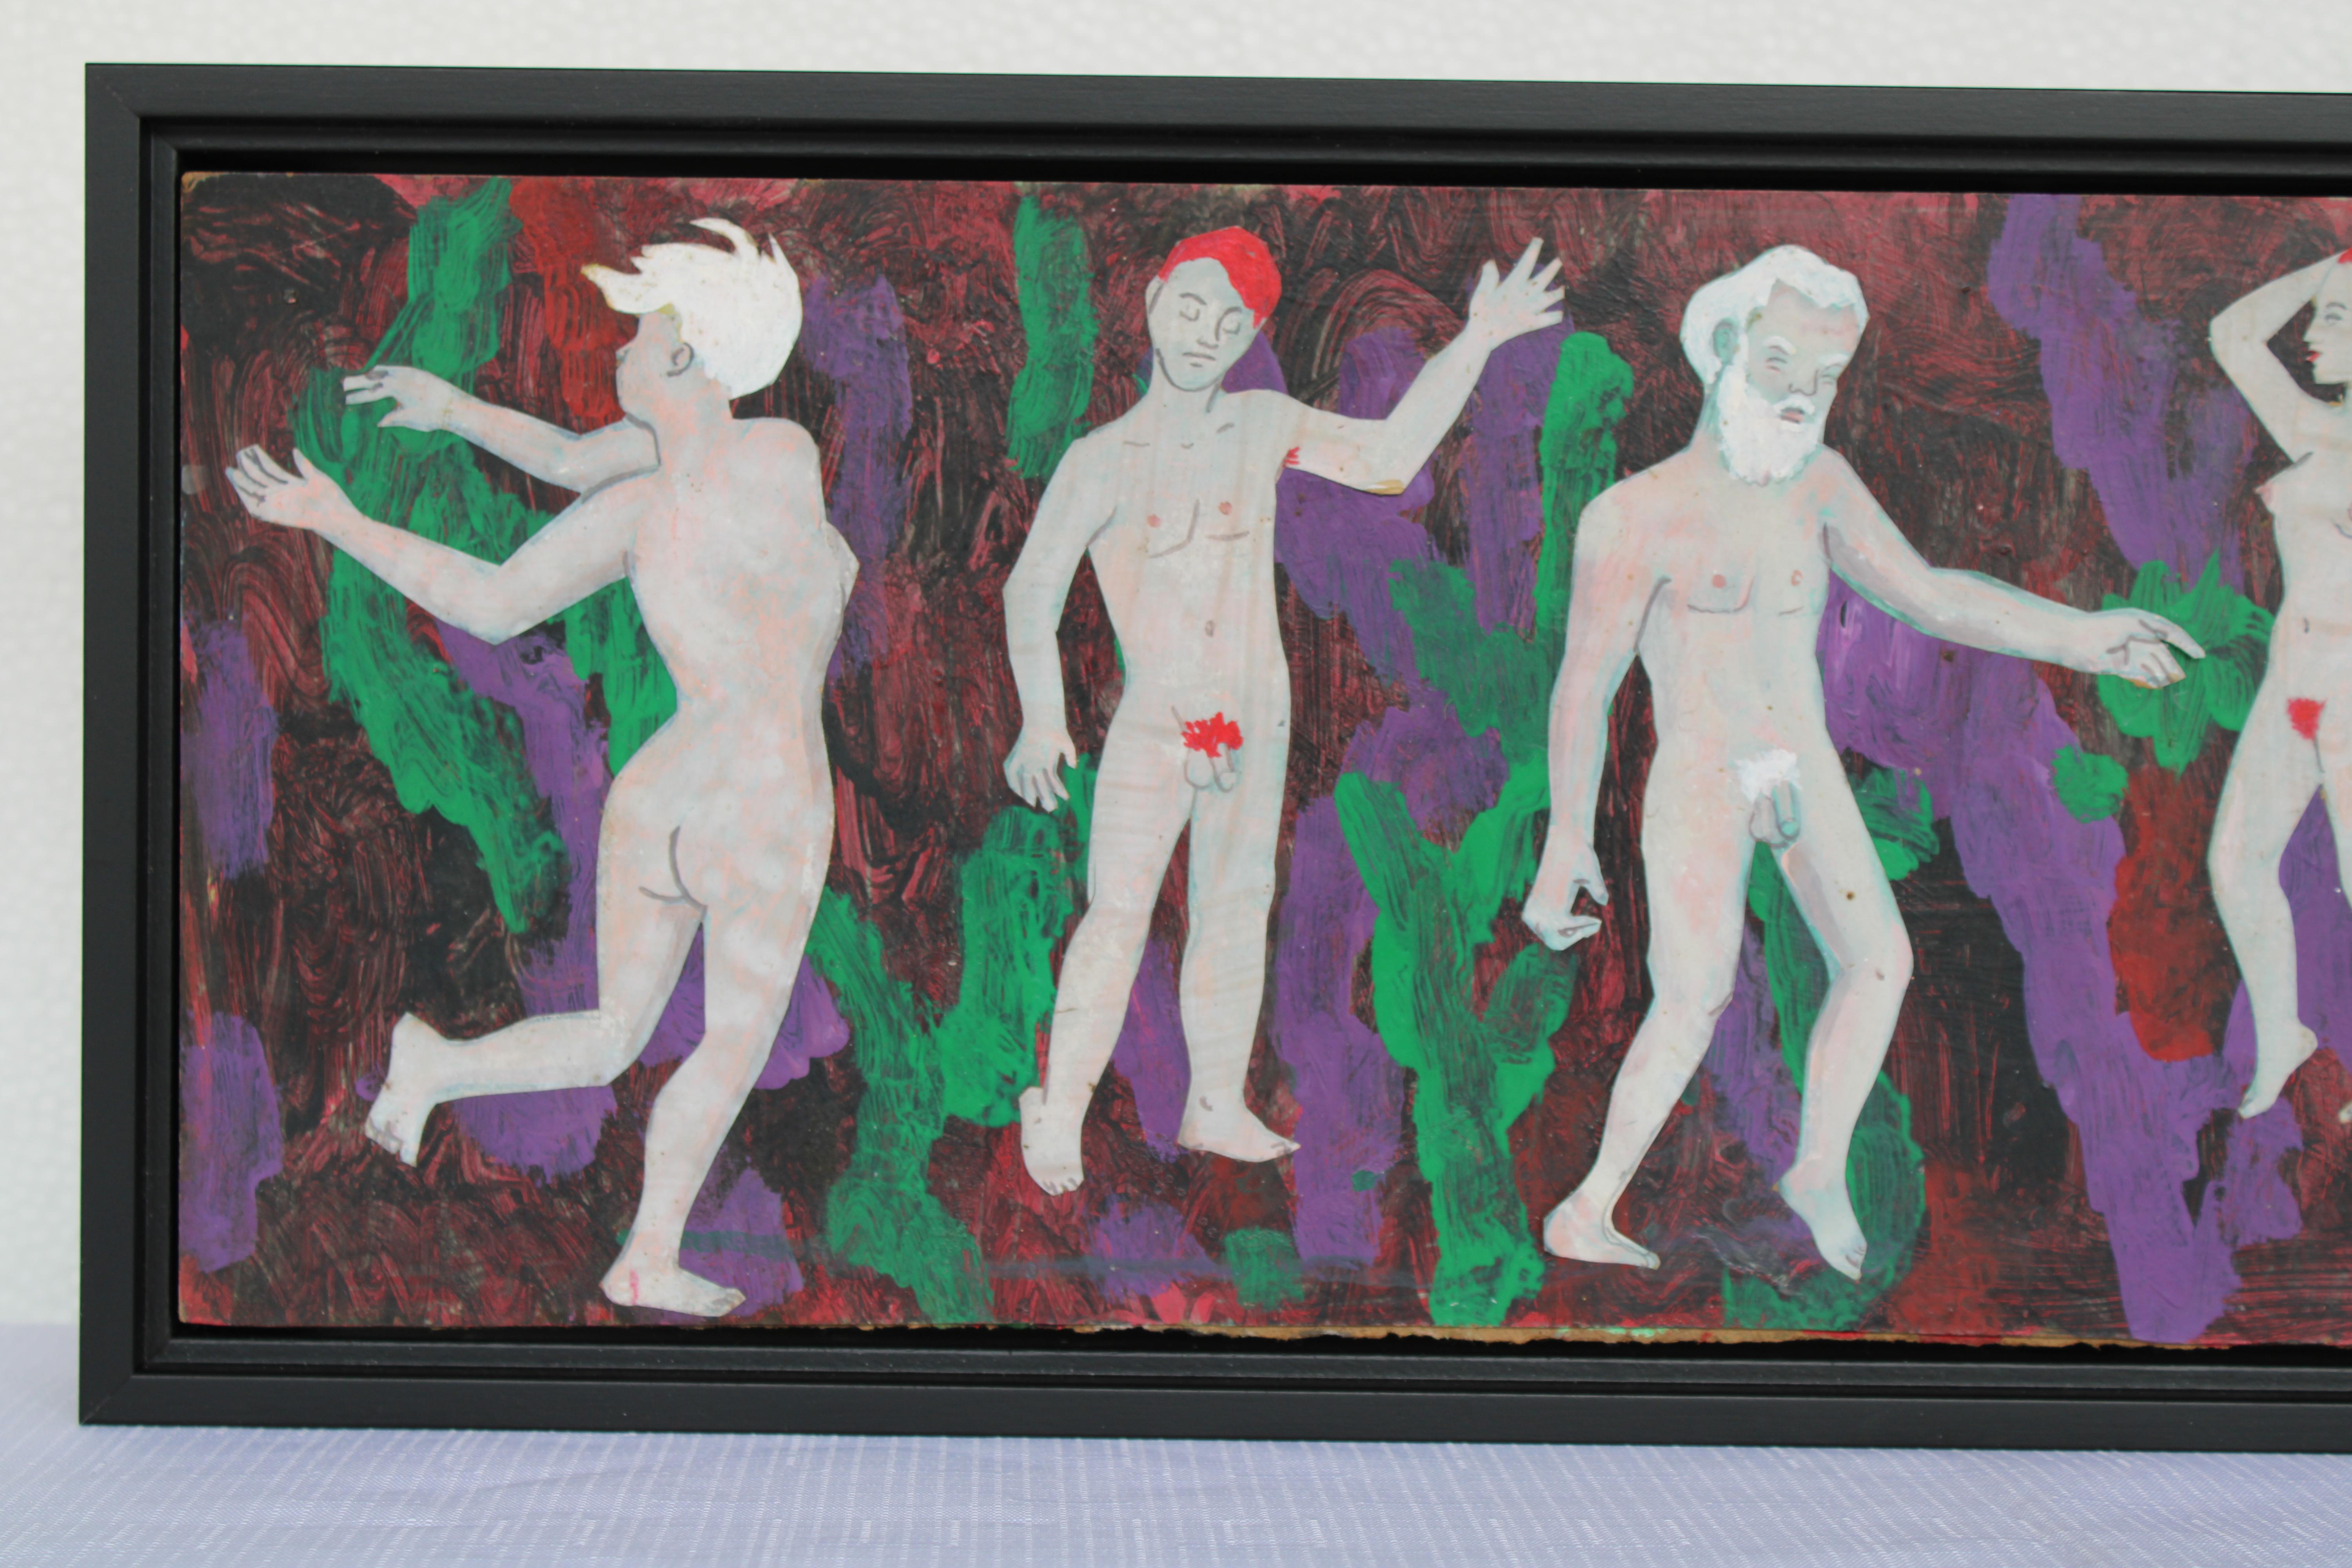 Outsider art painting using paper cutouts on masonite board titled Spielunkers, 3/10/09 RRD.  Assemblage measures 25